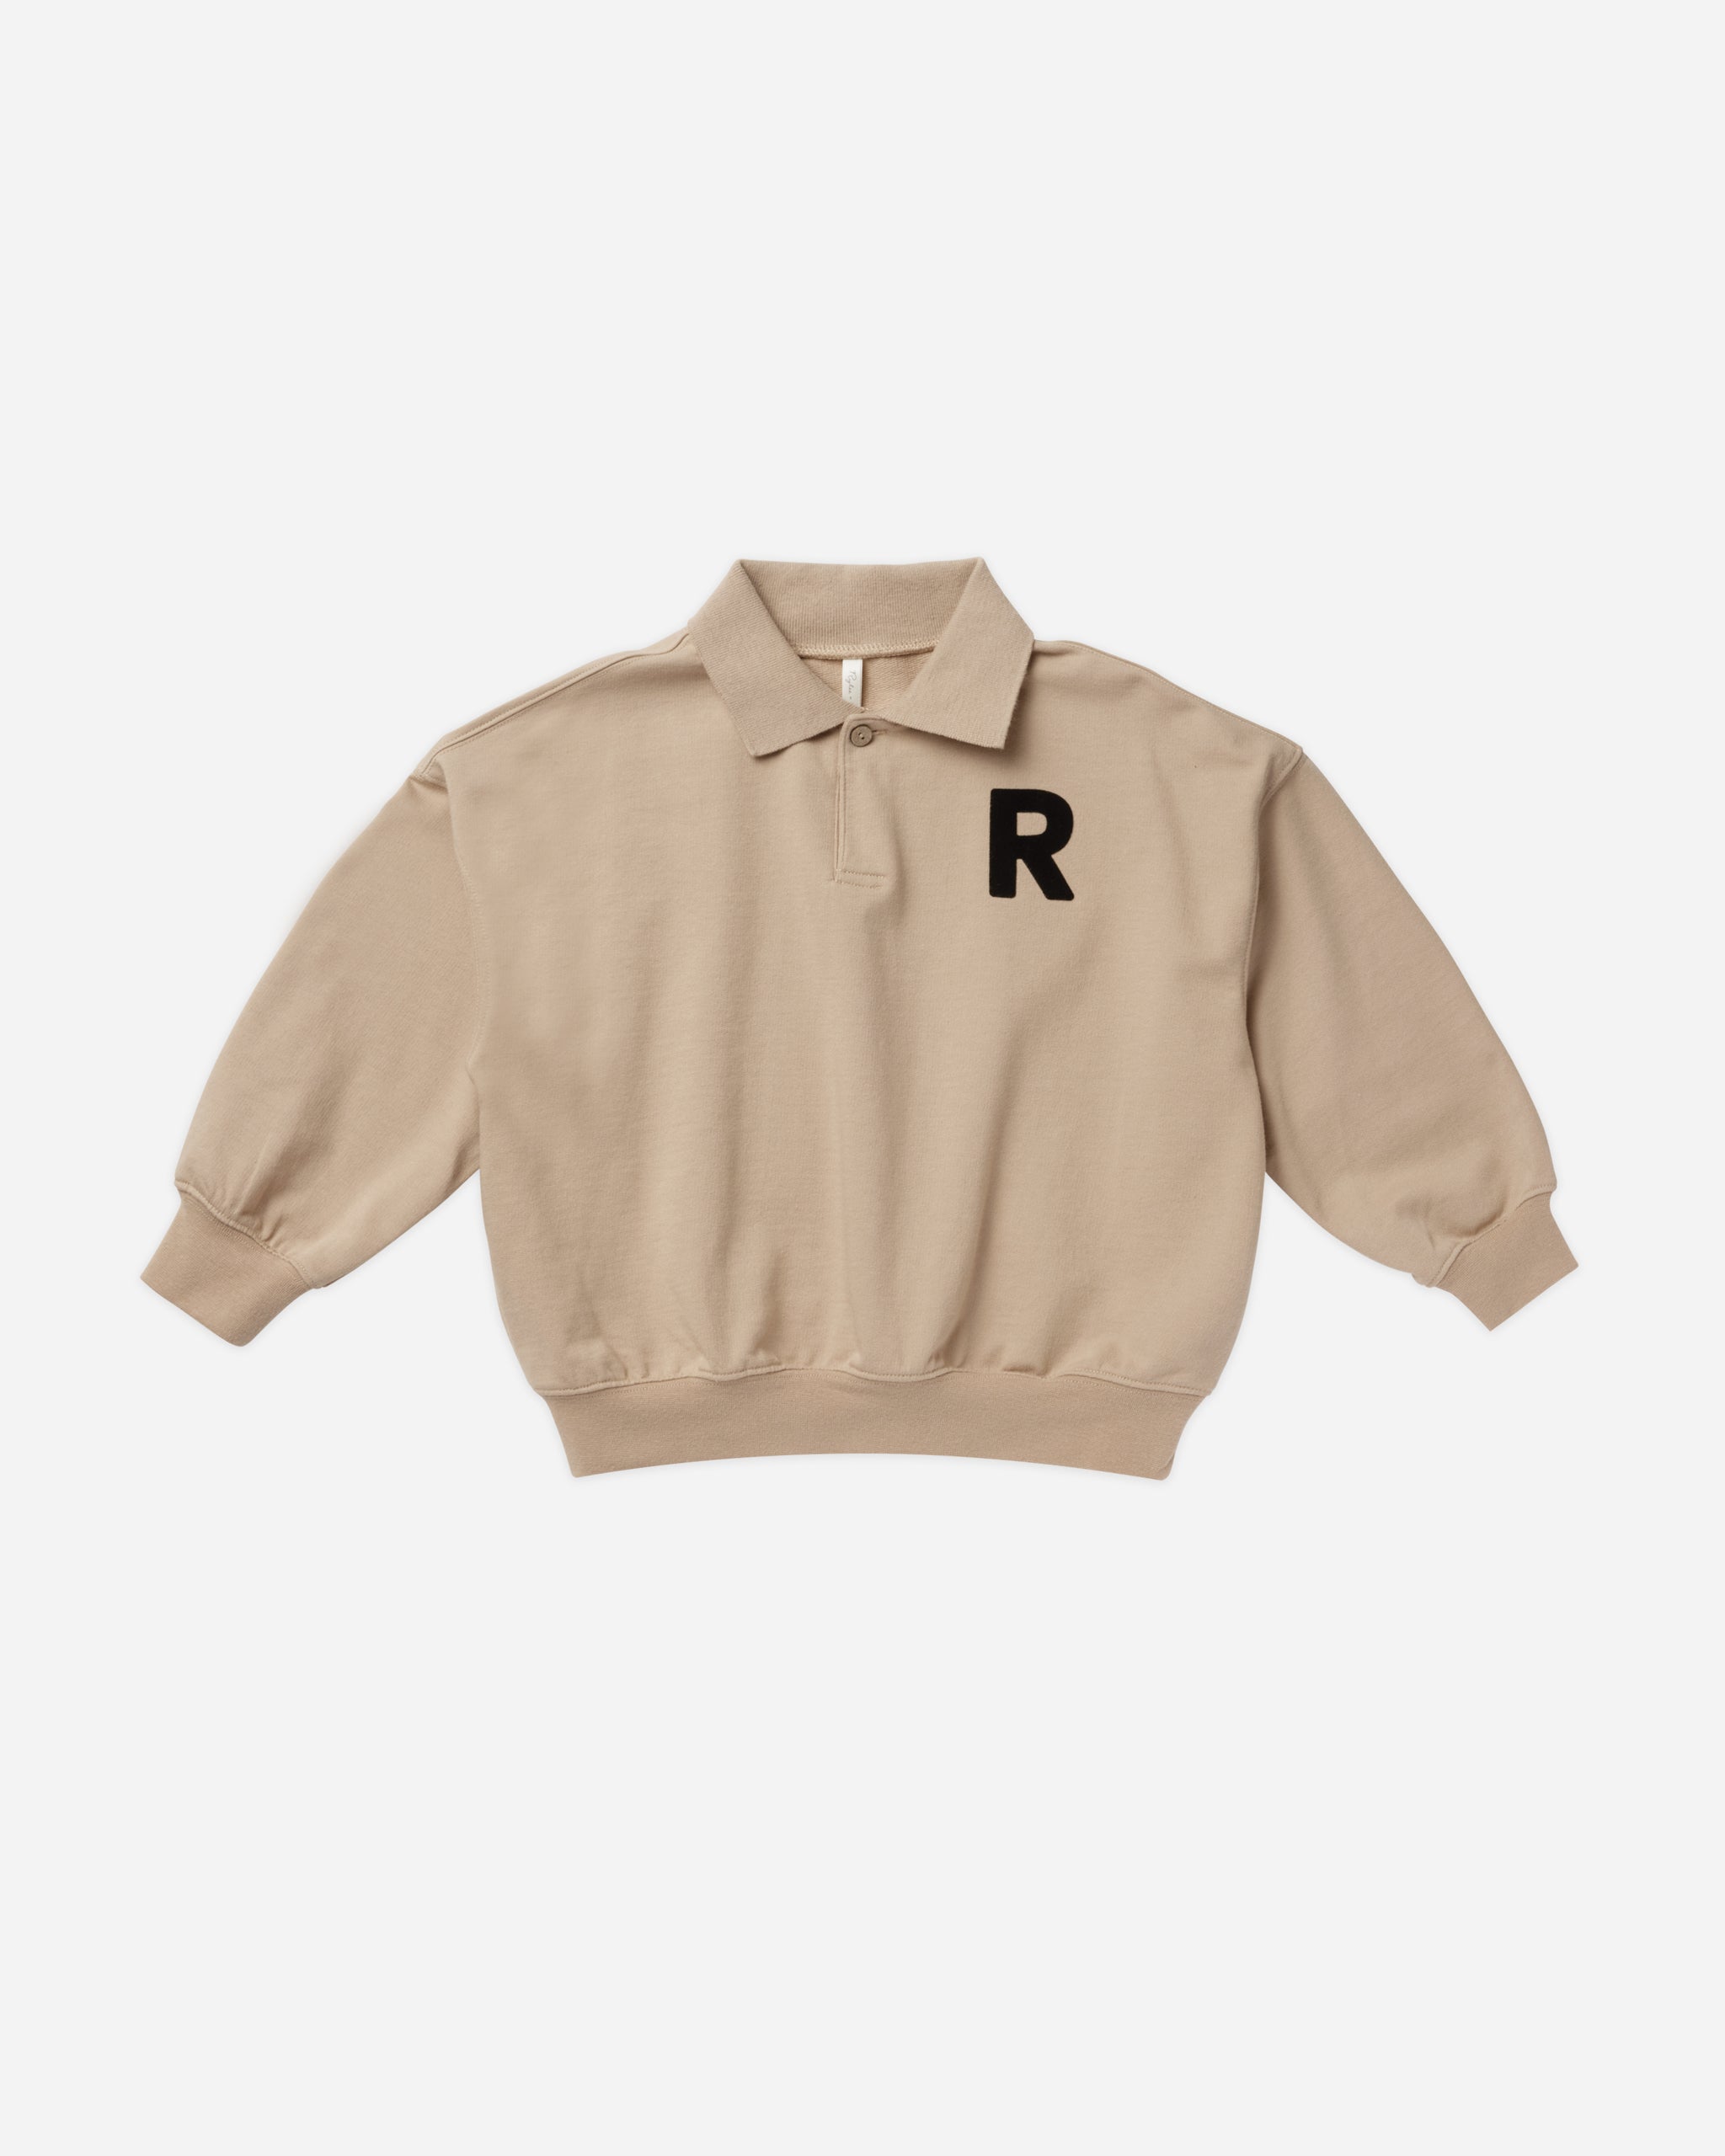 Collared Sweatshirt || Sand - Rylee + Cru | Kids Clothes | Trendy Baby Clothes | Modern Infant Outfits |